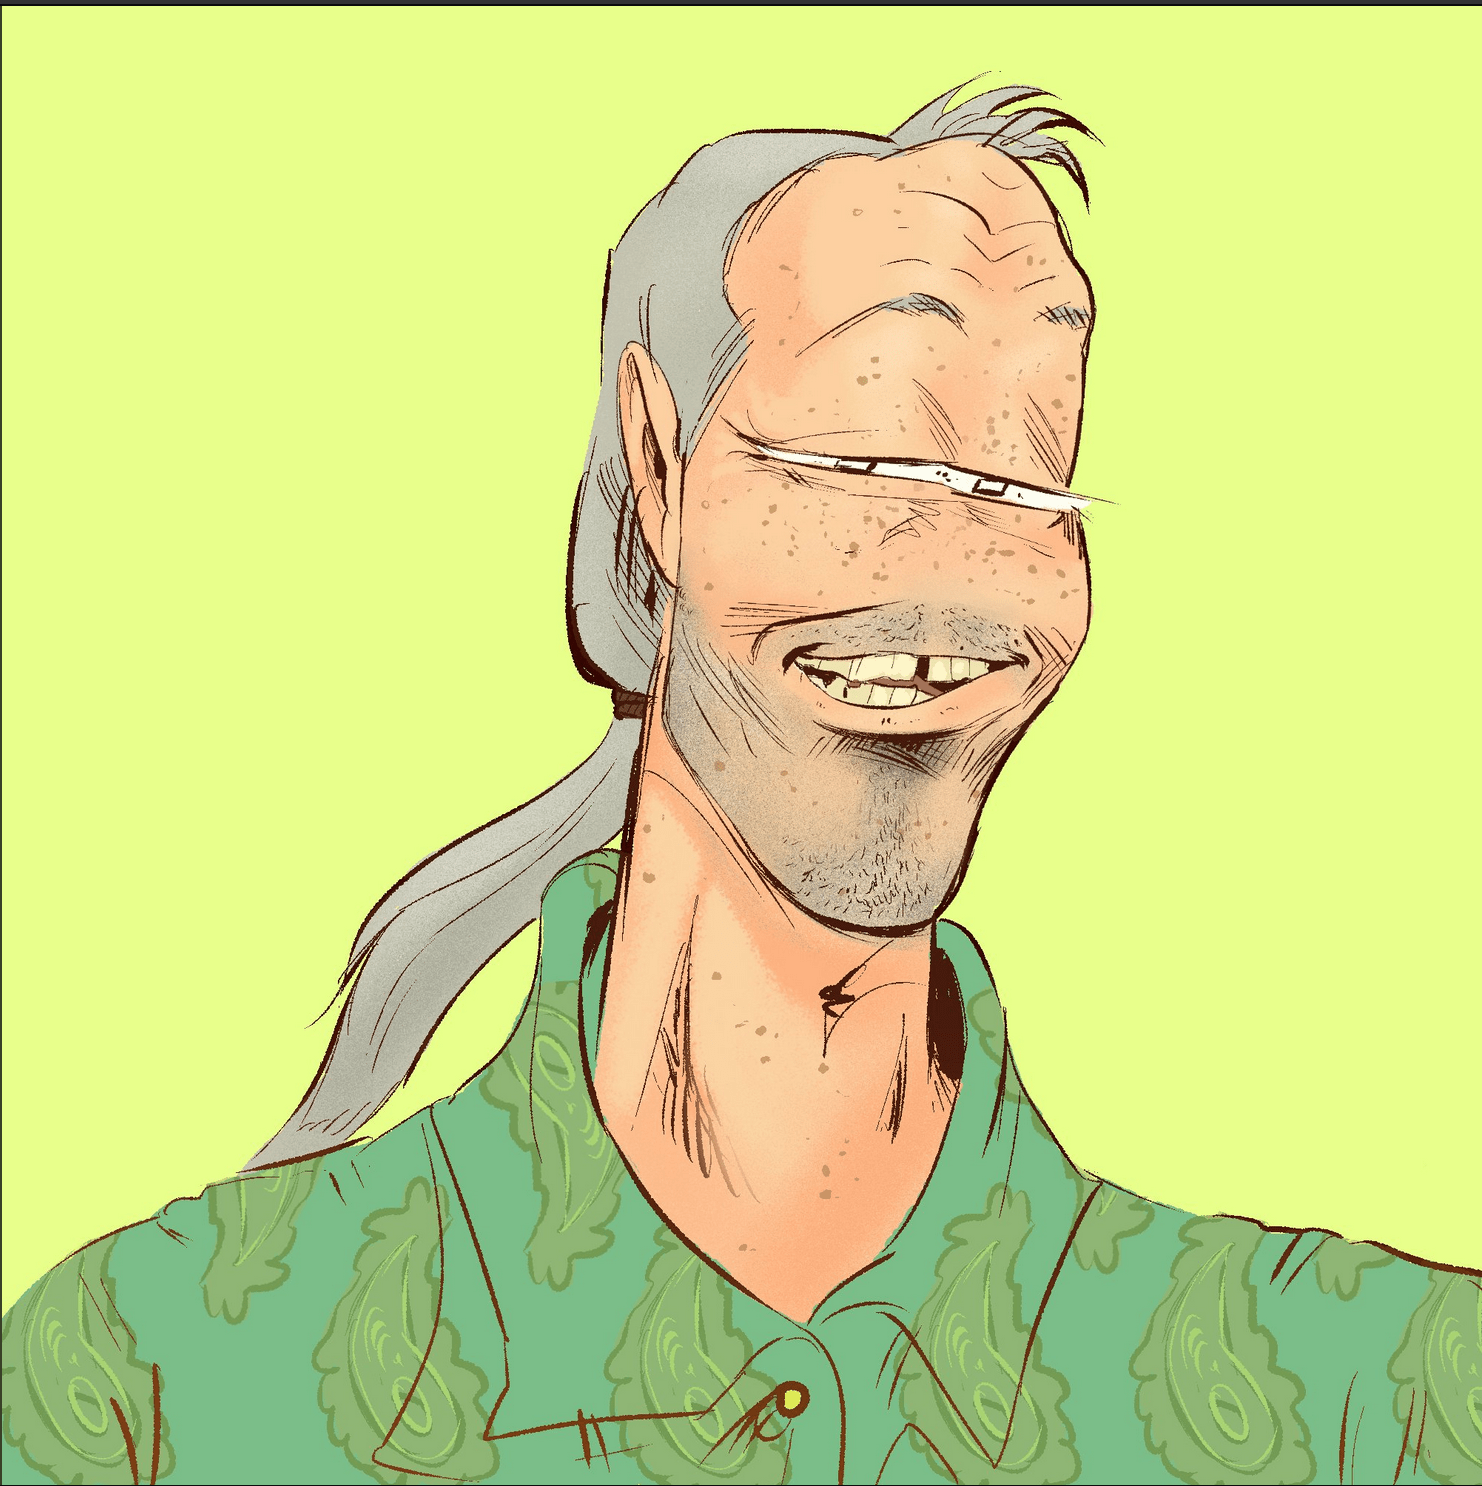 astral with a light green background and a dark green paisley button up shirt. he's smiling. he has very crooked teeth, very squinty, long gray ponytail